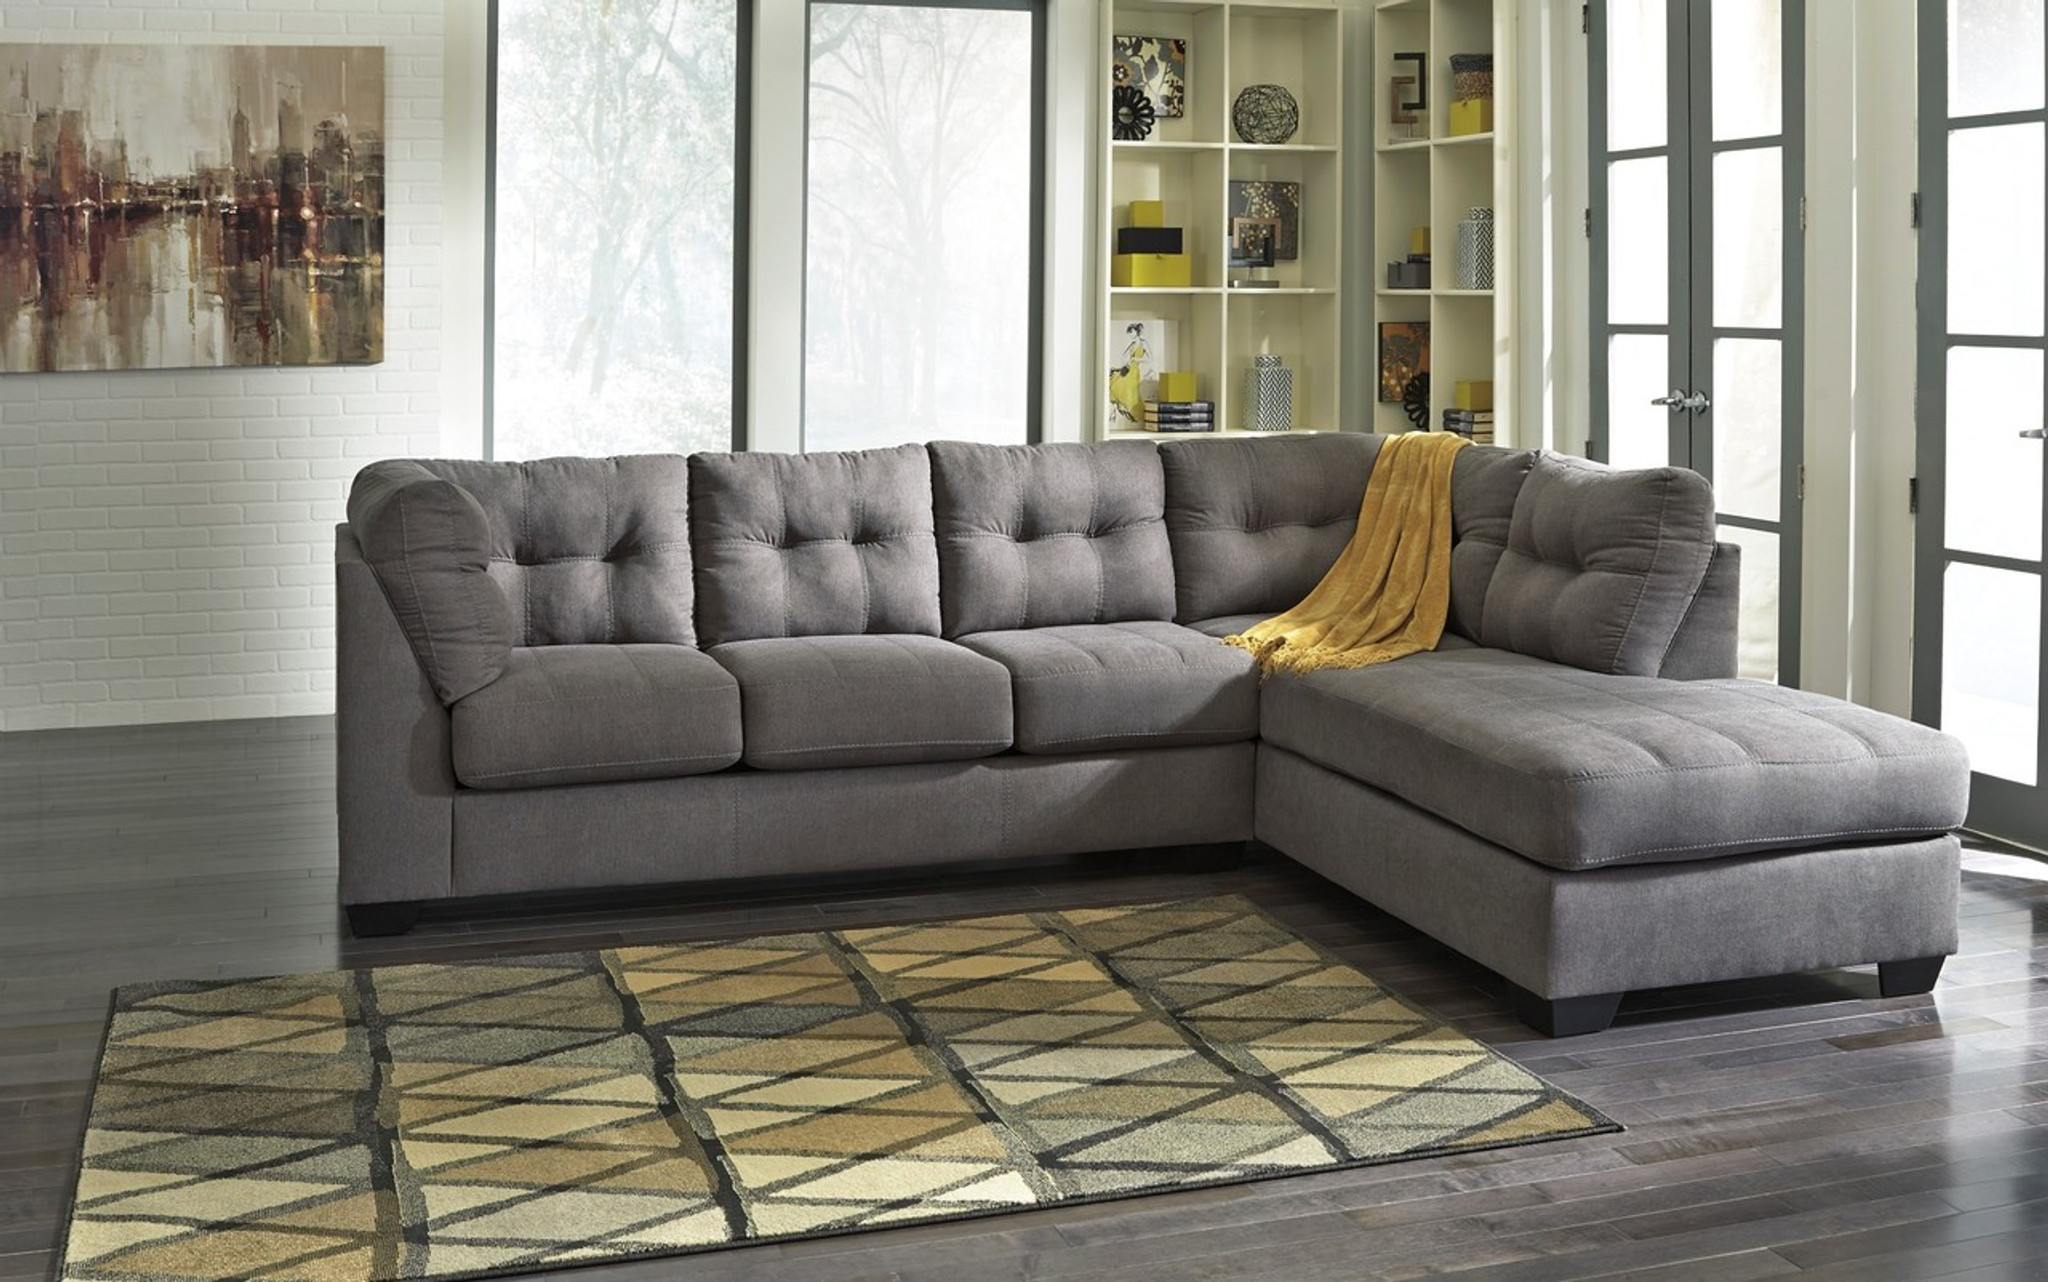 45200 66 17 MAIER CHARCOAL COLLECTION SECTIONAL SET COLLECTION By Ashley Furniture